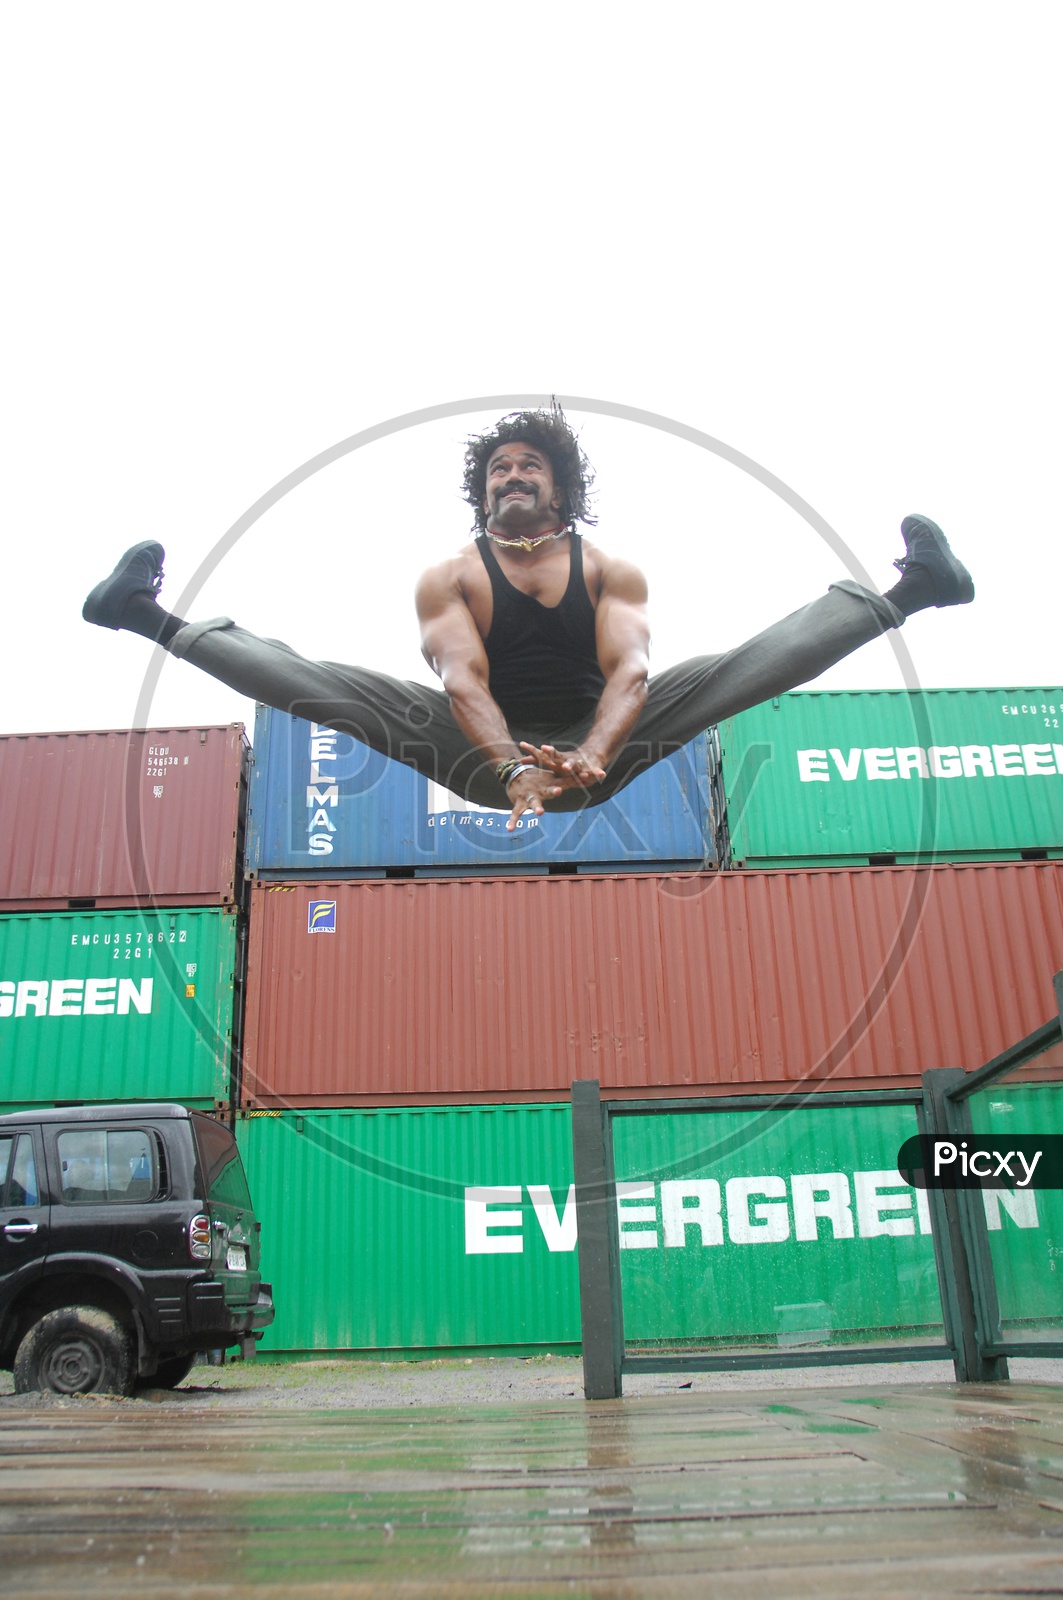 Indian man in a Action Sequence in Movie Shooting